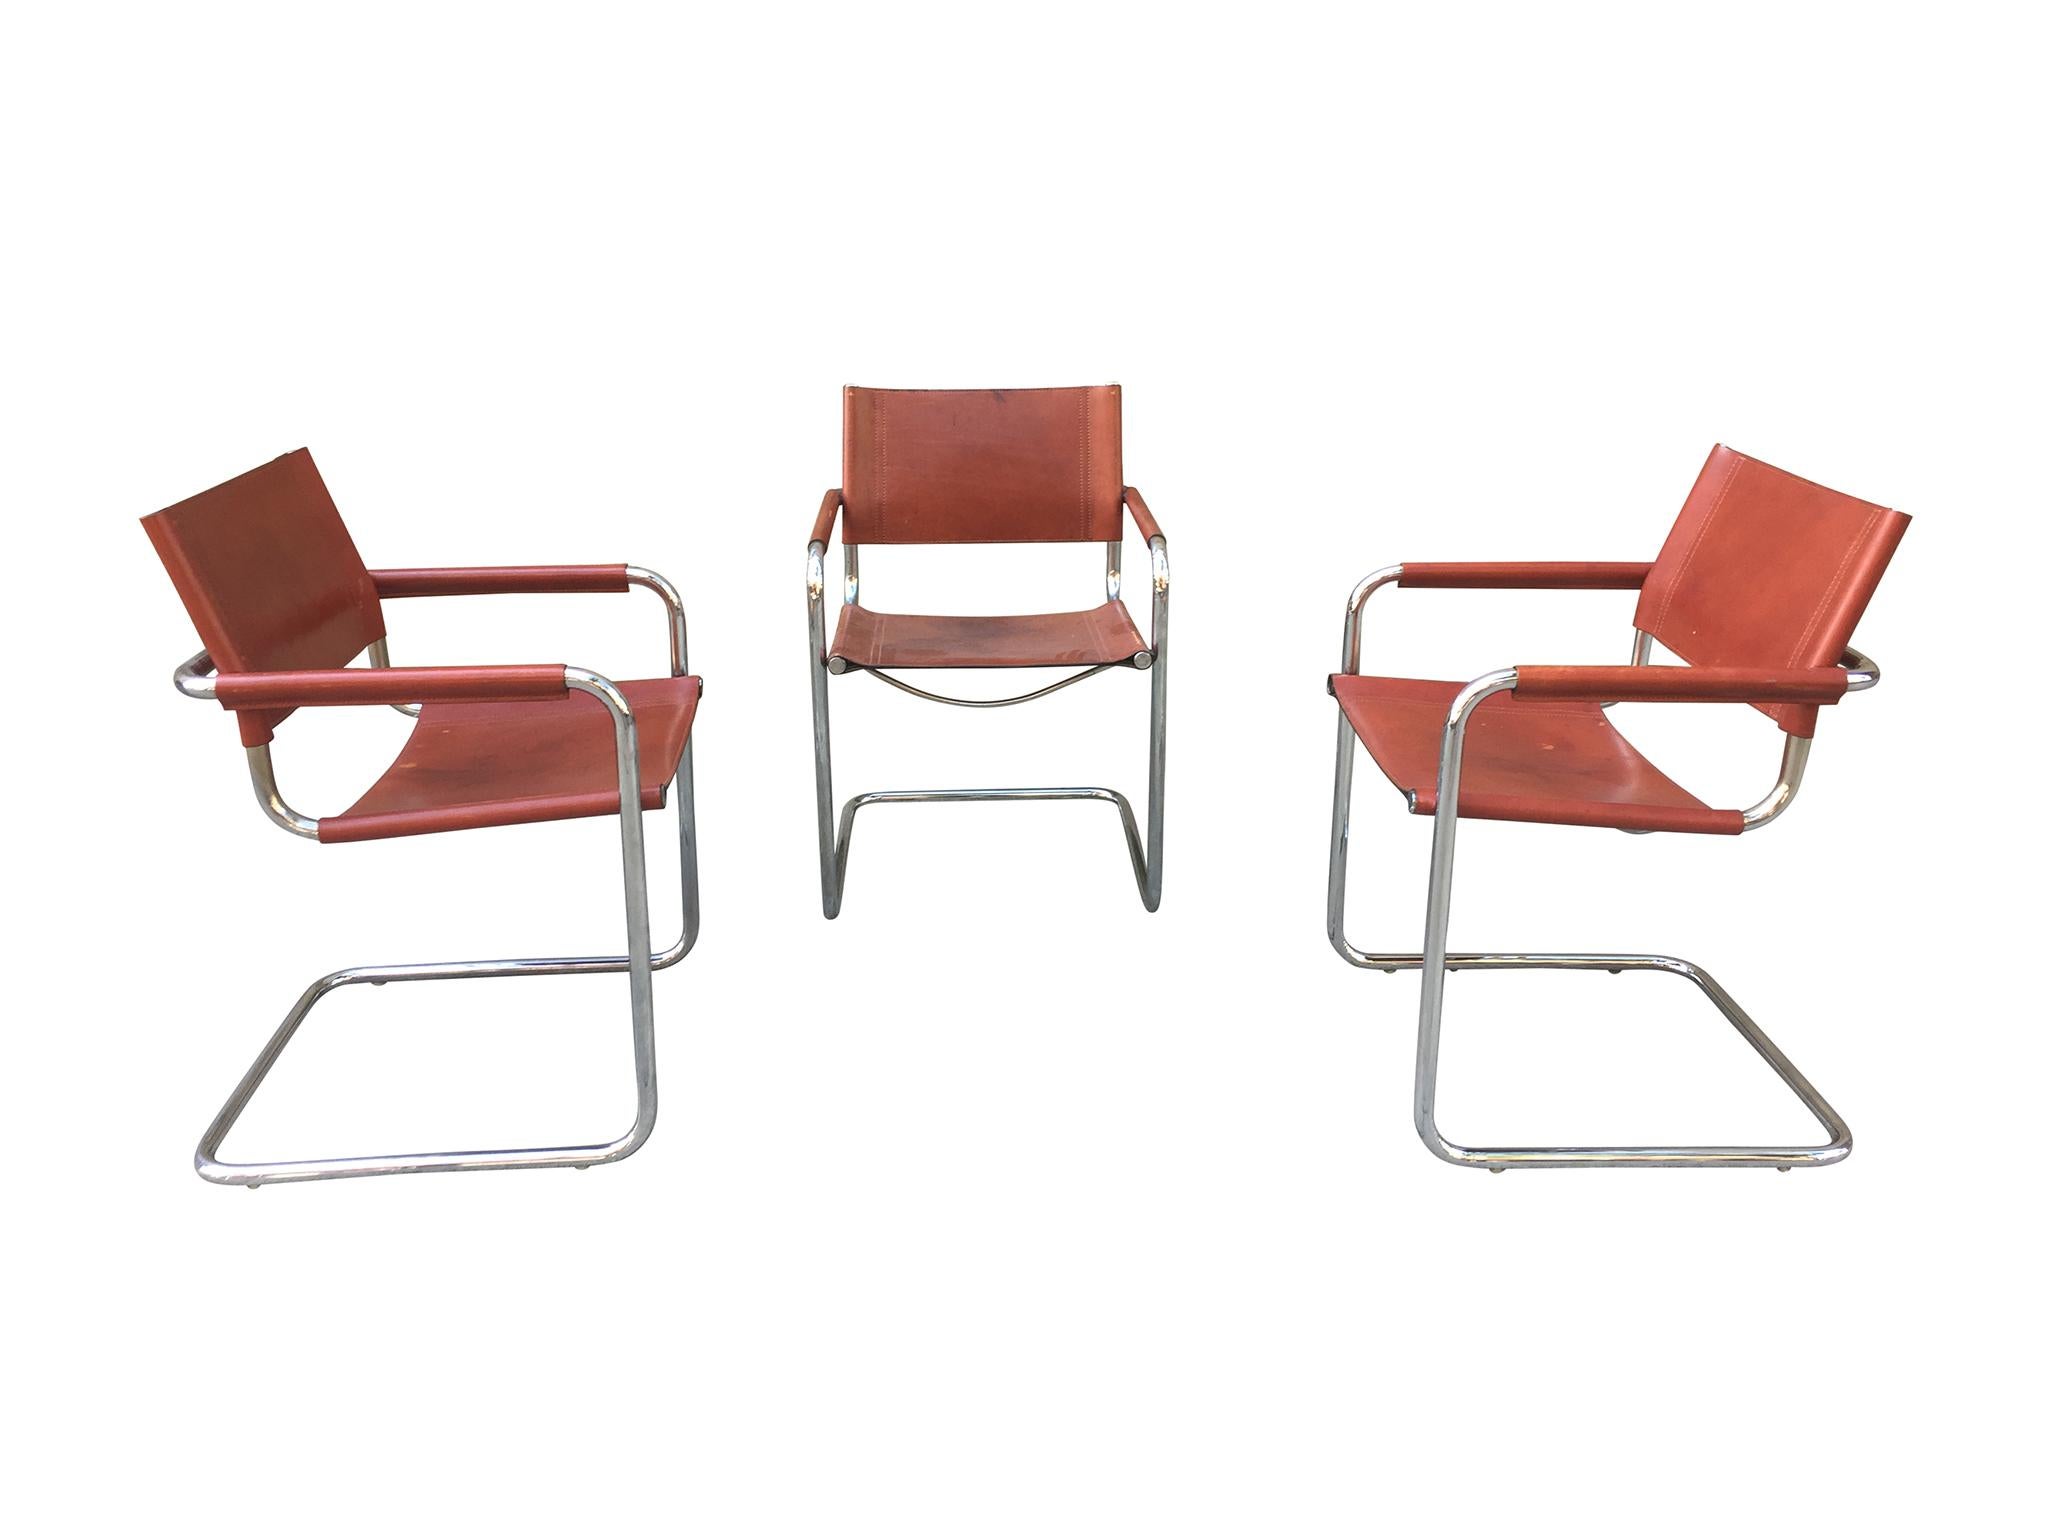 Italian 1970s Stendig Leather and Chrome Dining Chairs, a Set of 6